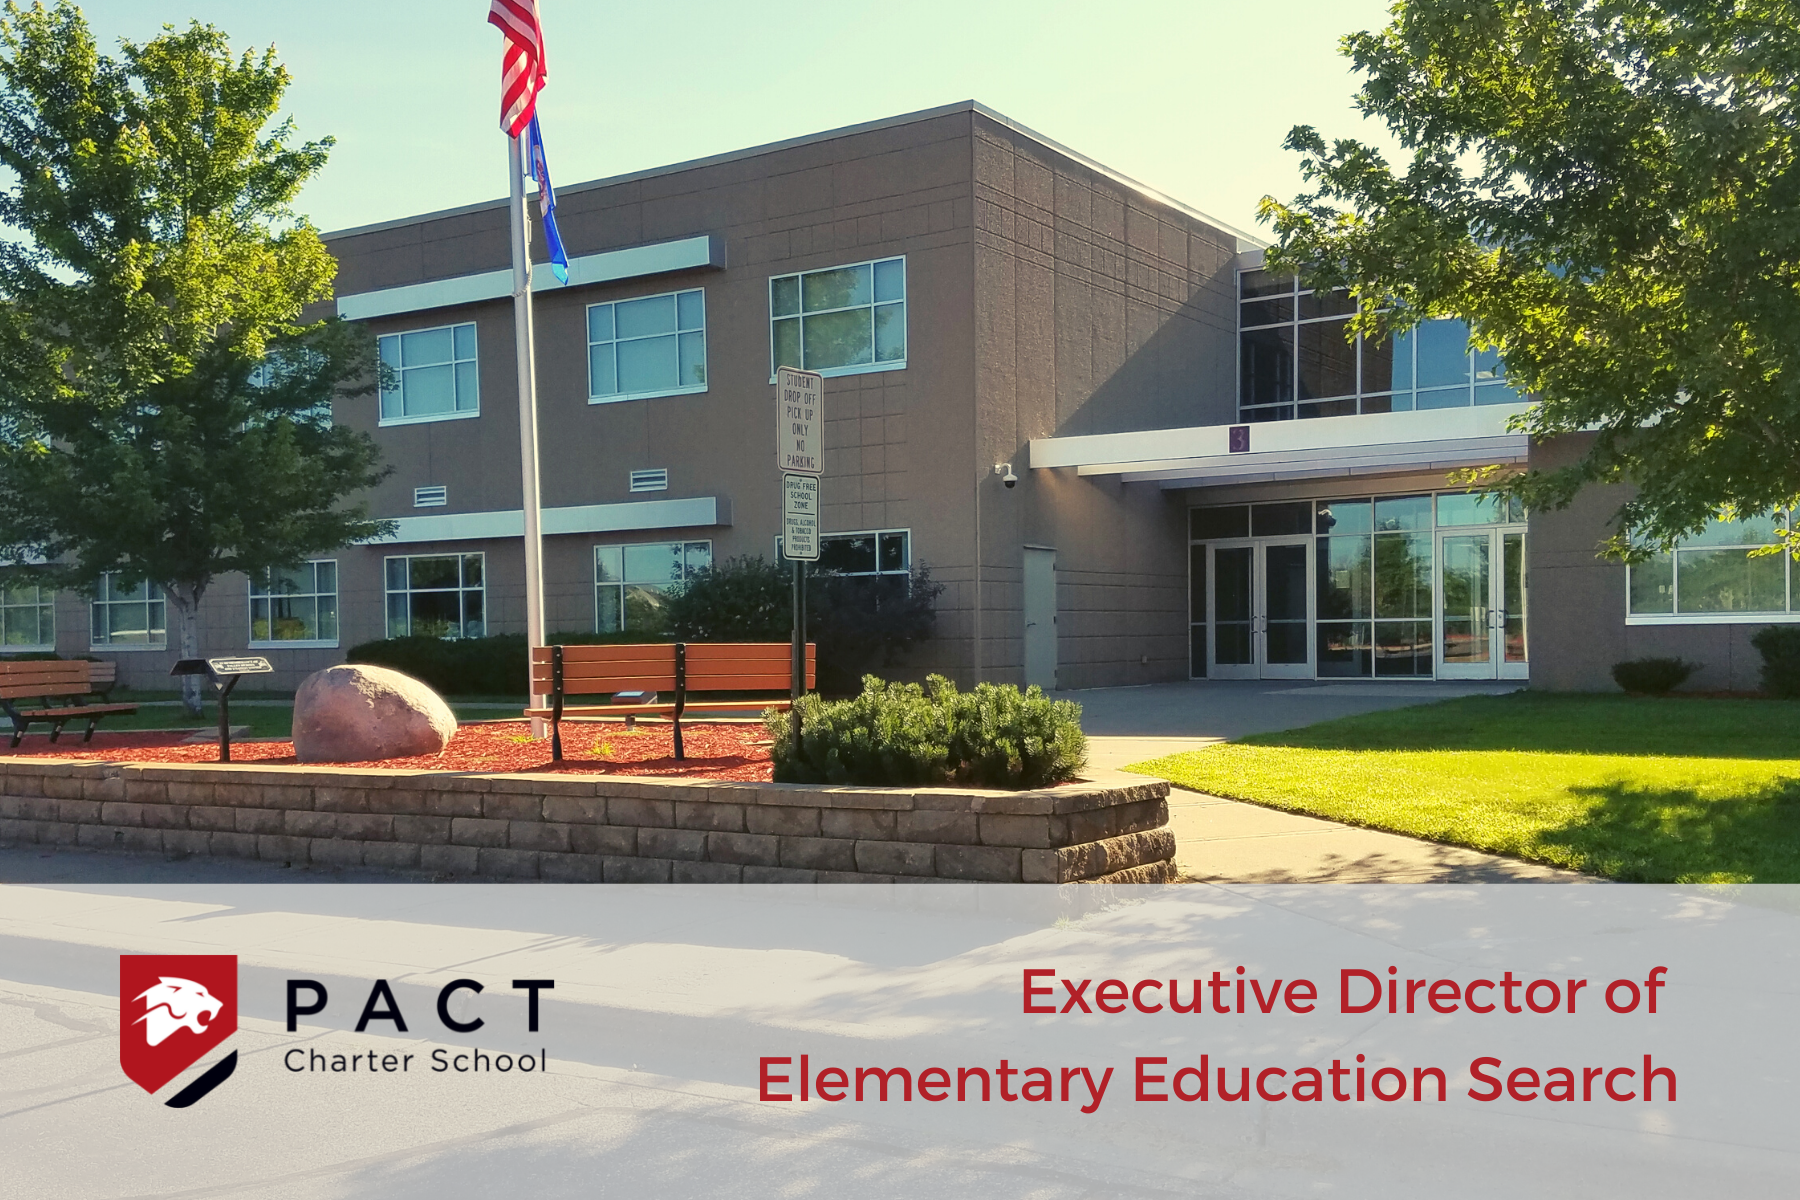 PACT Seeks Executive Director of Elementary Education